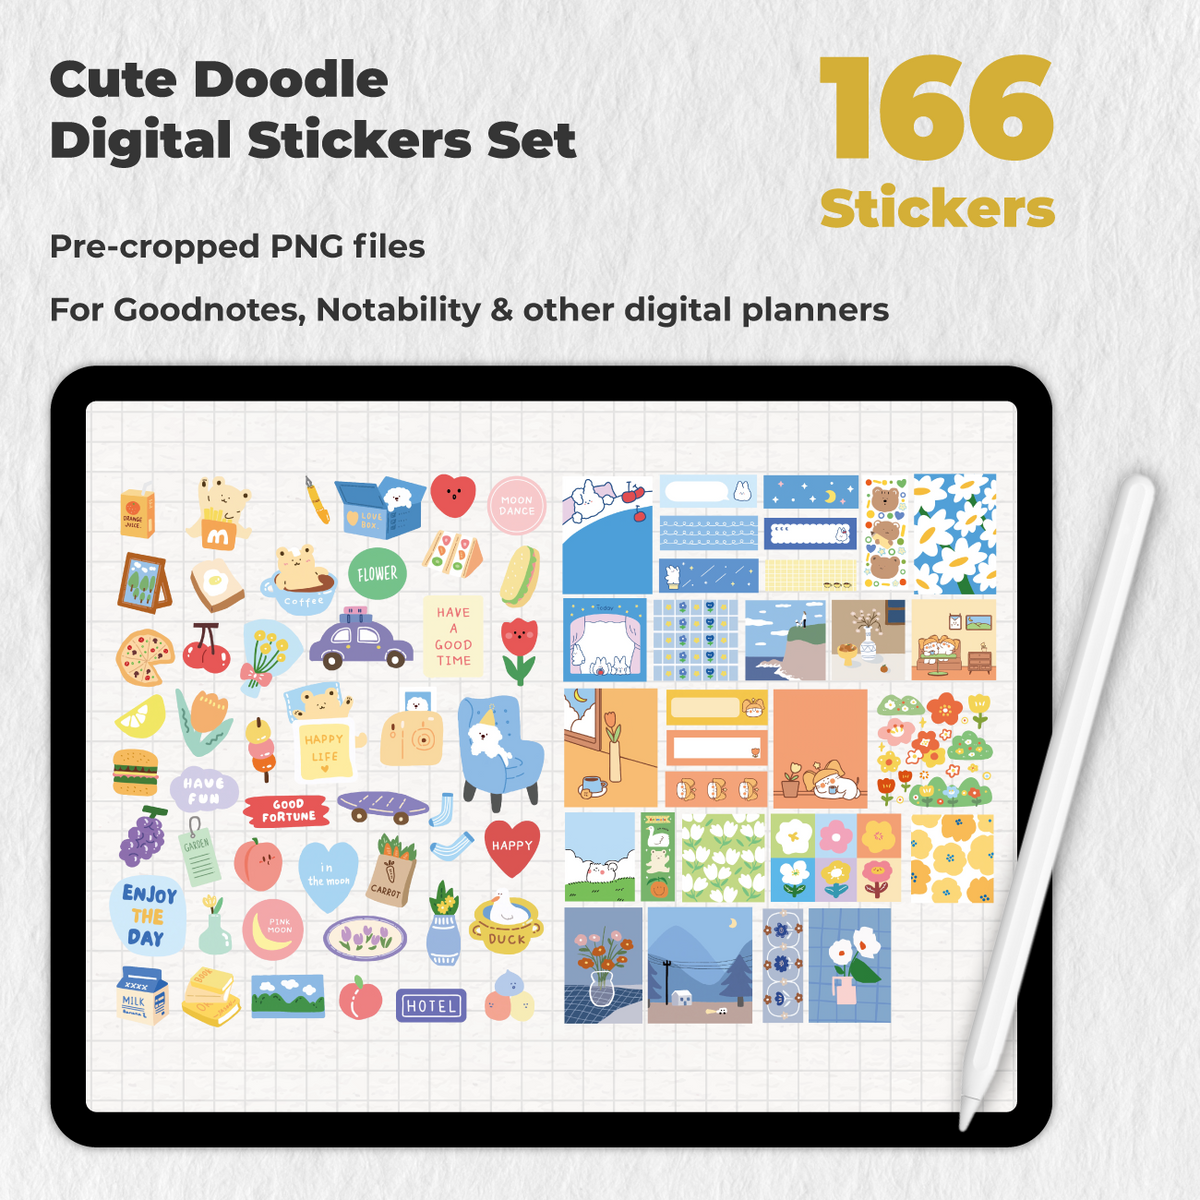 DIGITAL STICKERS BOOK AND STICKERS SET